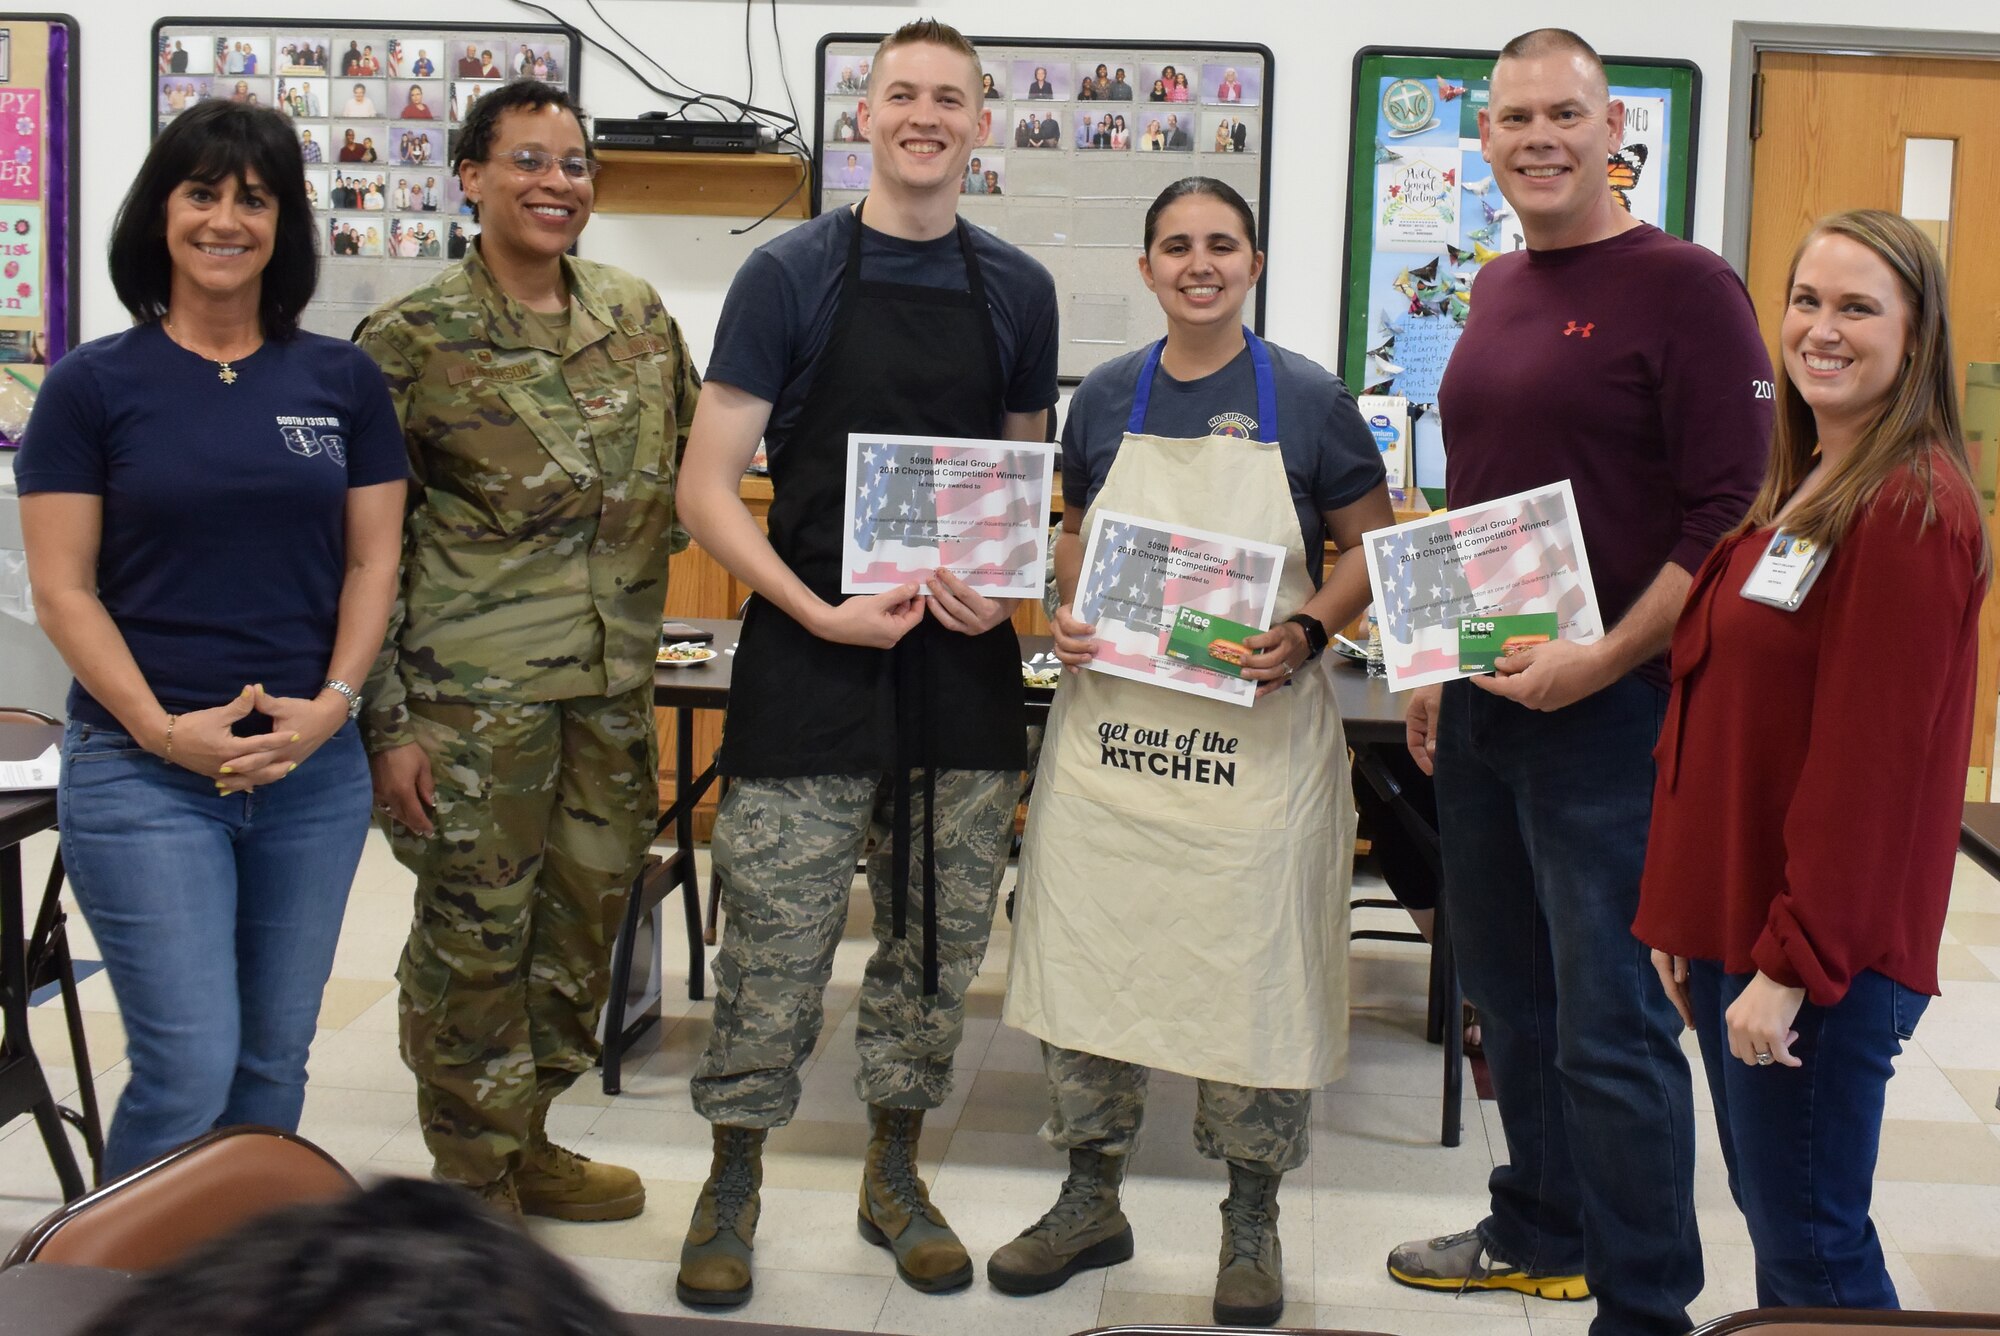 Alicia Ferris-Dannenberg, the health promotion coordinator assigned to 509th Bomb Wing Public Affairs, poses with Team What the Fork for a photo on May 3, 2019, after winning a healthy eating competition at Whiteman Air Force Base, Missouri. The 509th MDG hosted acompetition modeled after the popular show Chopped to demonstrate how easy it can be to make healthy eating choices on a budget. (Courtesy photos by Alicia Ferris-Dannenburg)